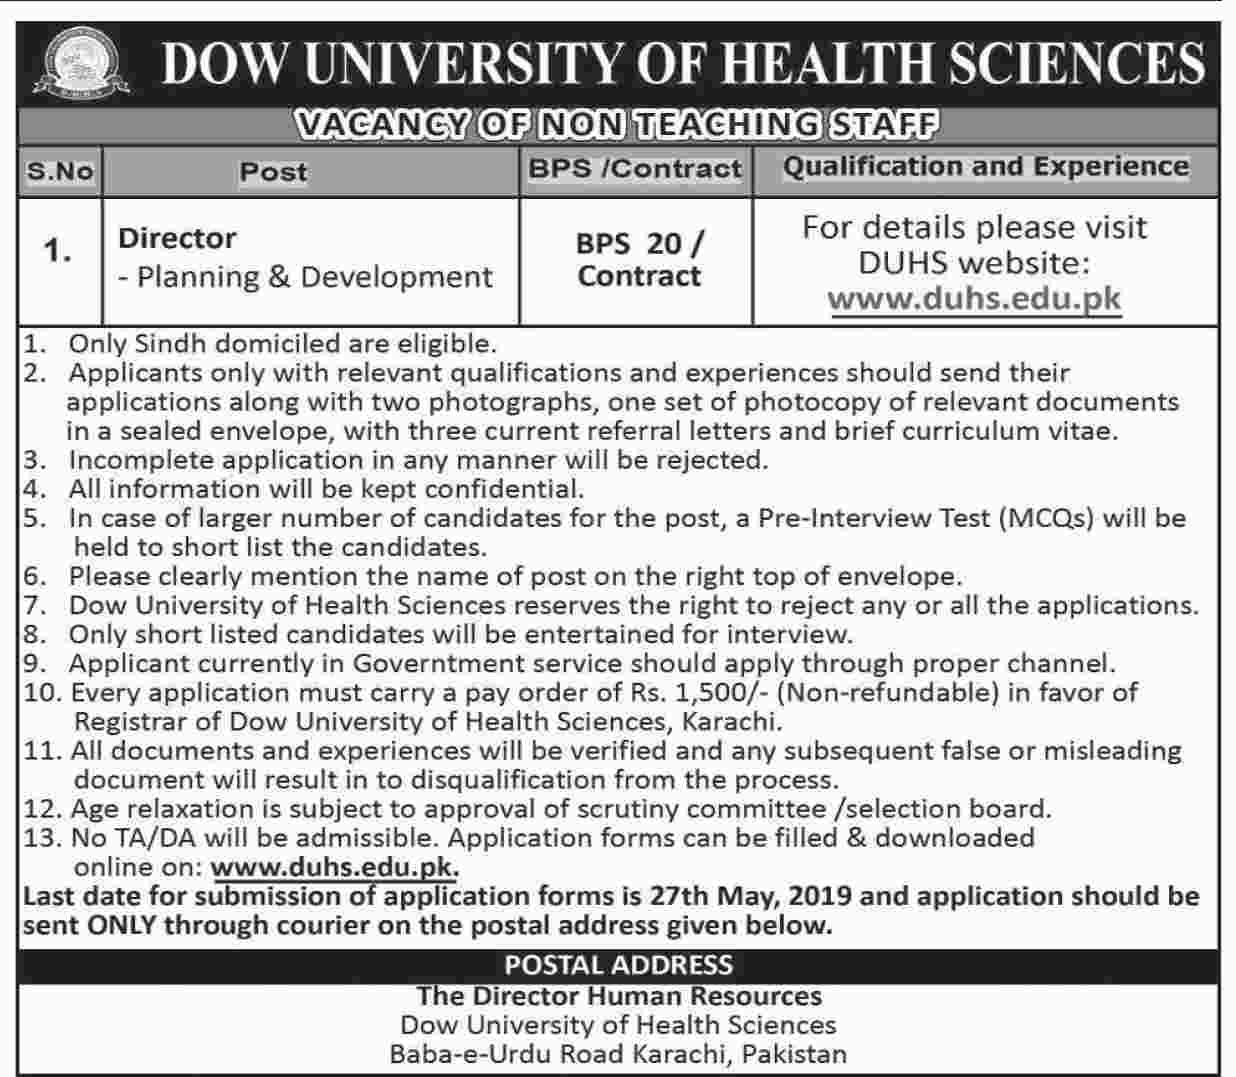 Get a Latest Jobs In DOW University Of Health Sciences 2019